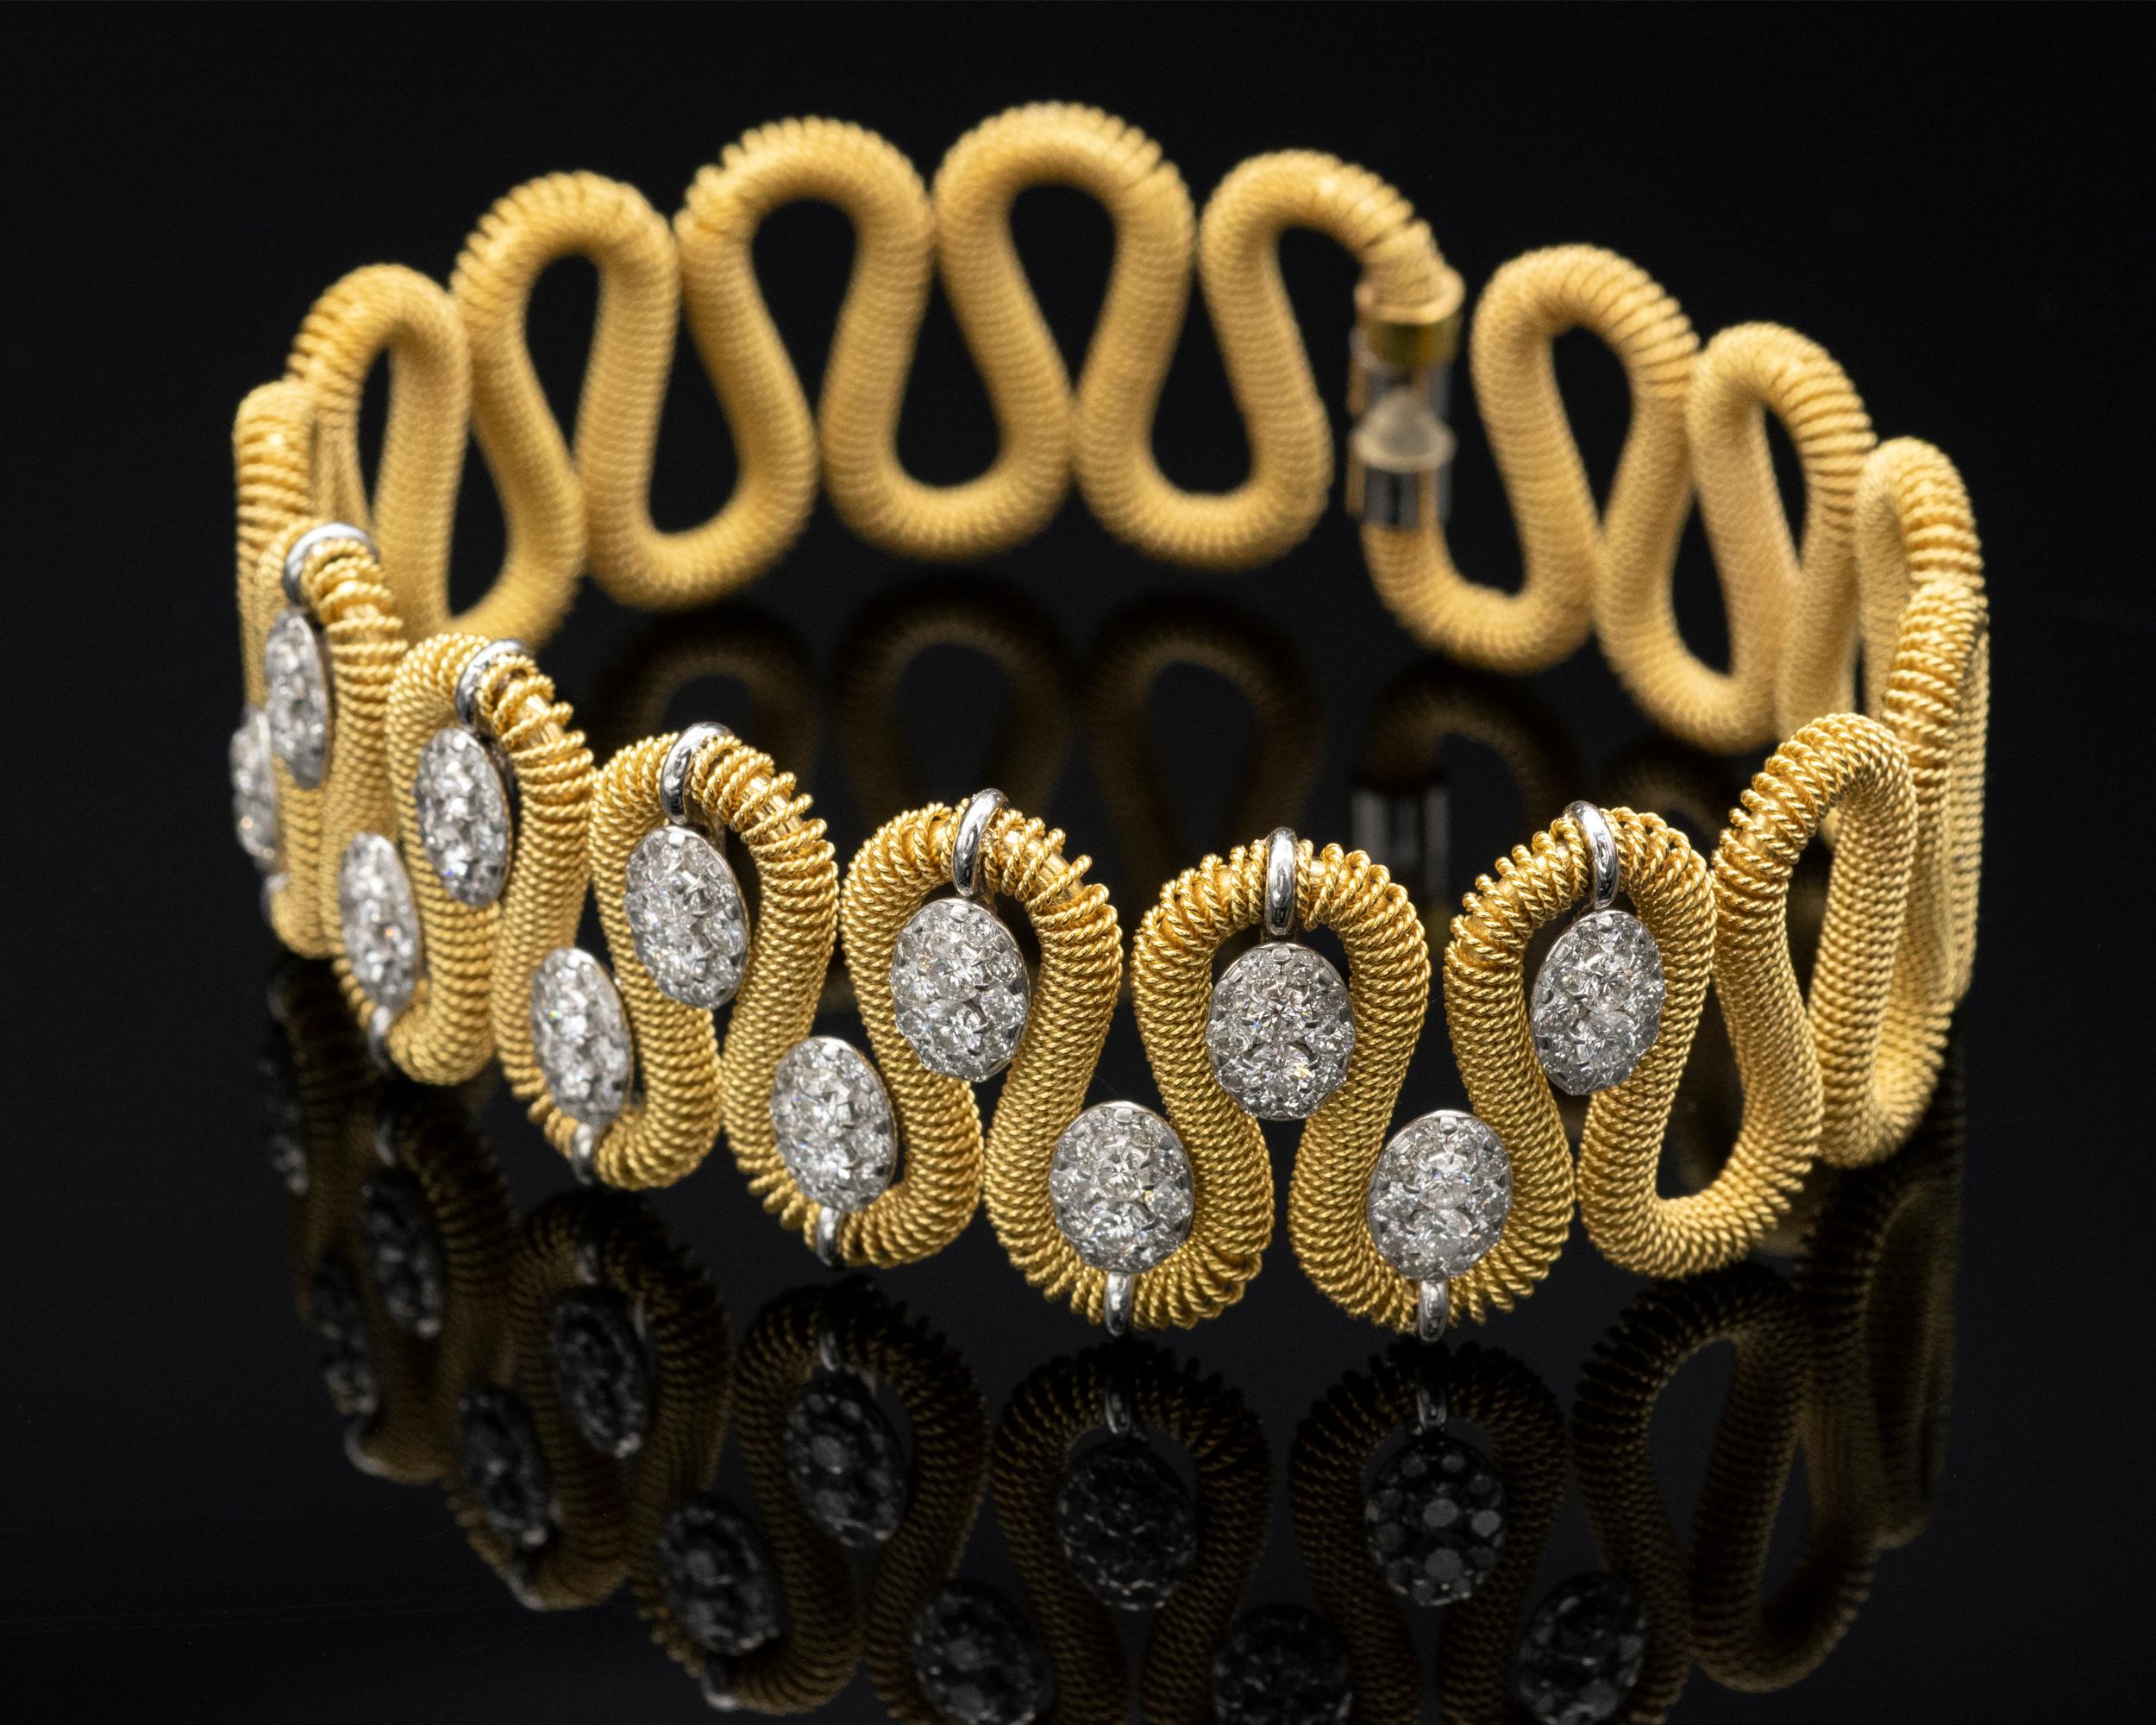 Exquisite 18KT gold cuff bracelet, Entirely hand crafted by Marchisio italian jewellers since1859. The bracelet folds around the wrist and fits all sizes. 
Diamonds: 2.4 carats 
Gold : 24.5 gr

Matches Necklace Ref: LU47232577983
And Earrings Ref: